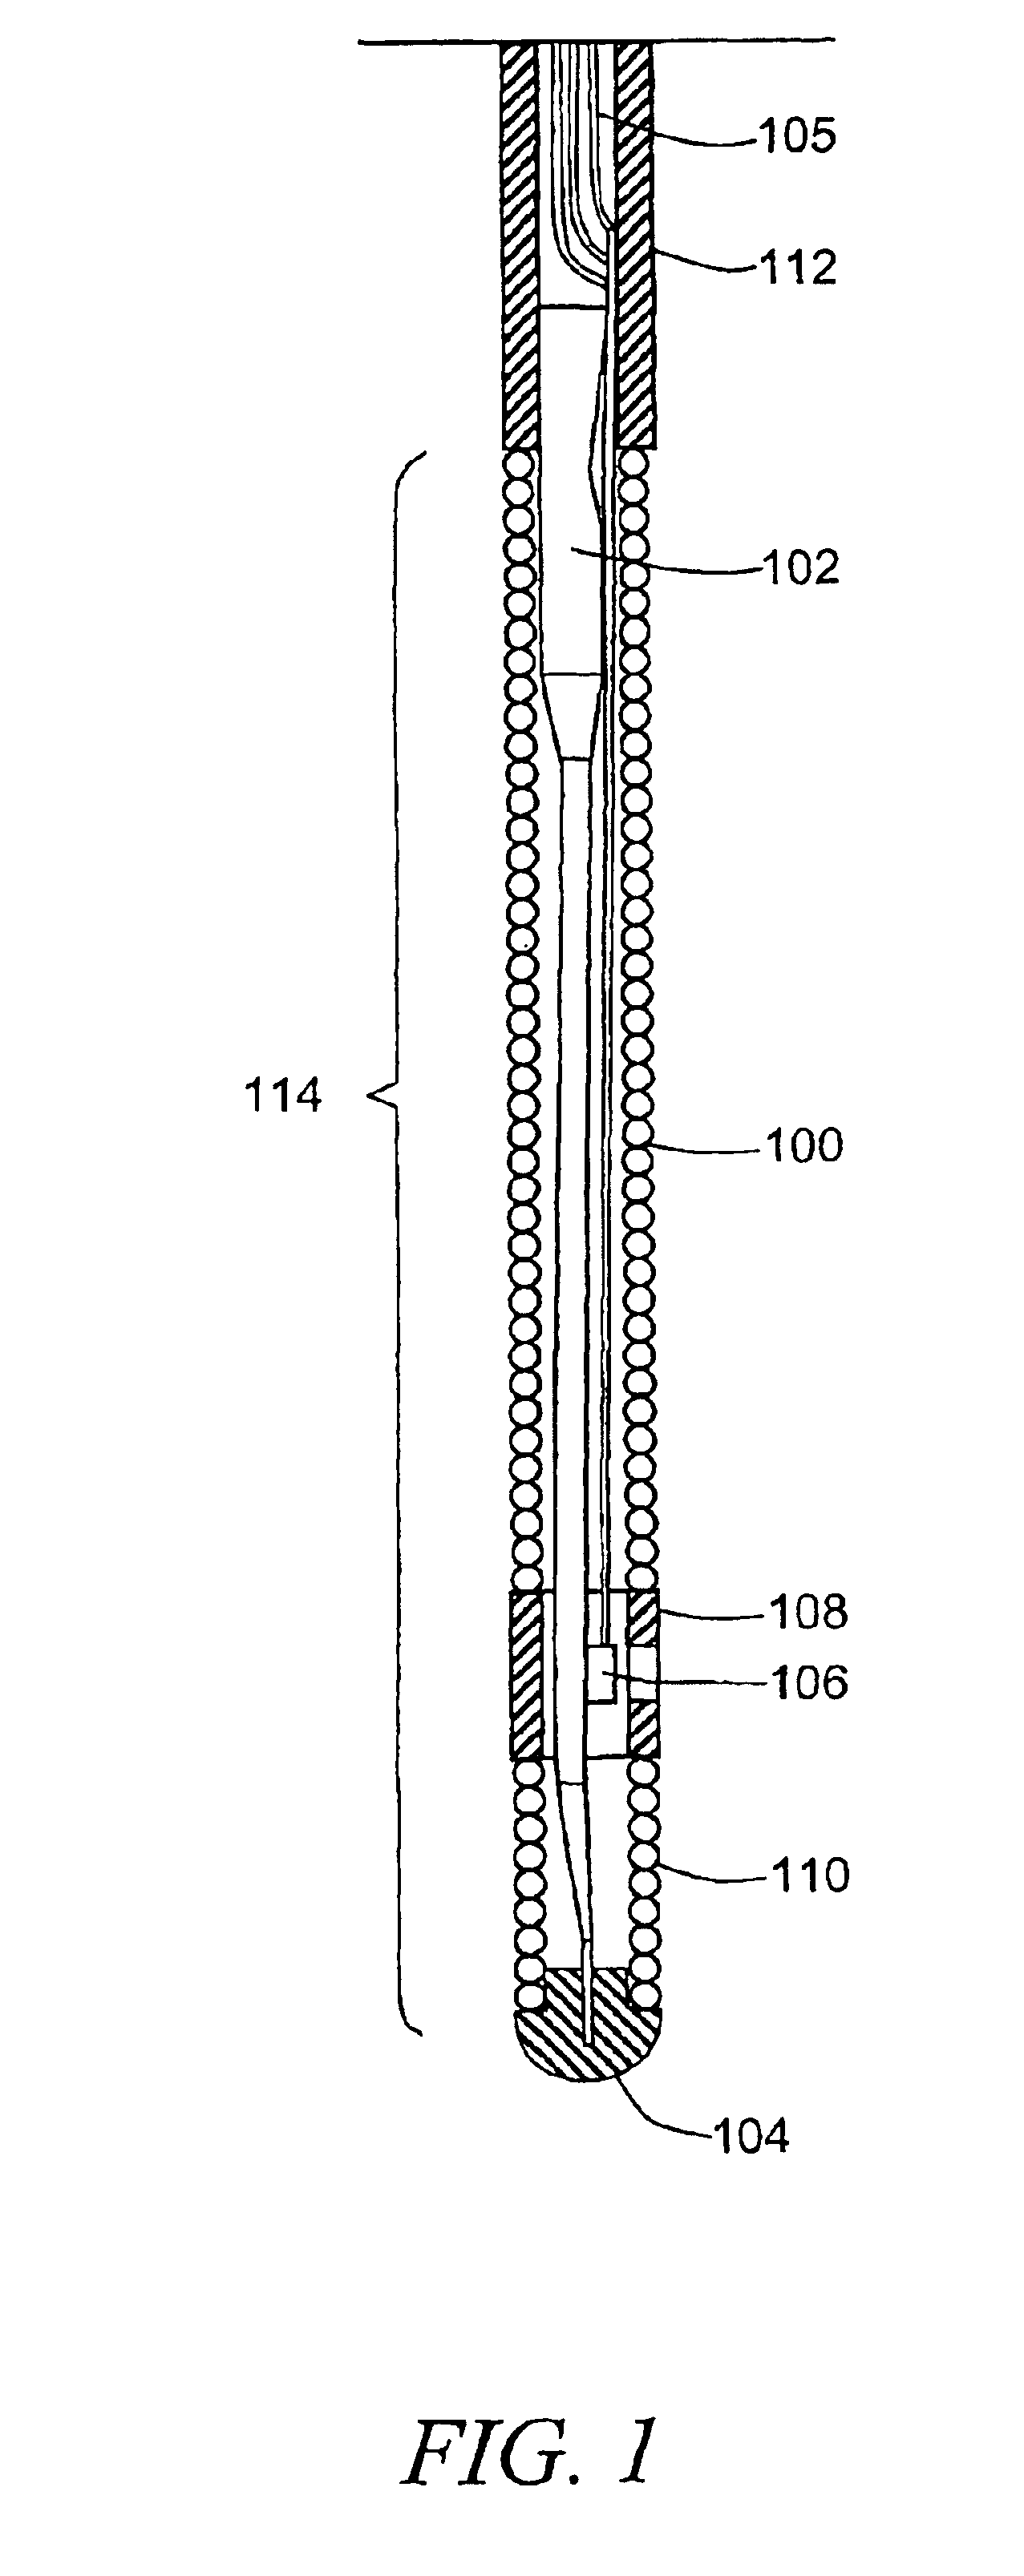 Combined pressure-volume sensor and guide wire assembly